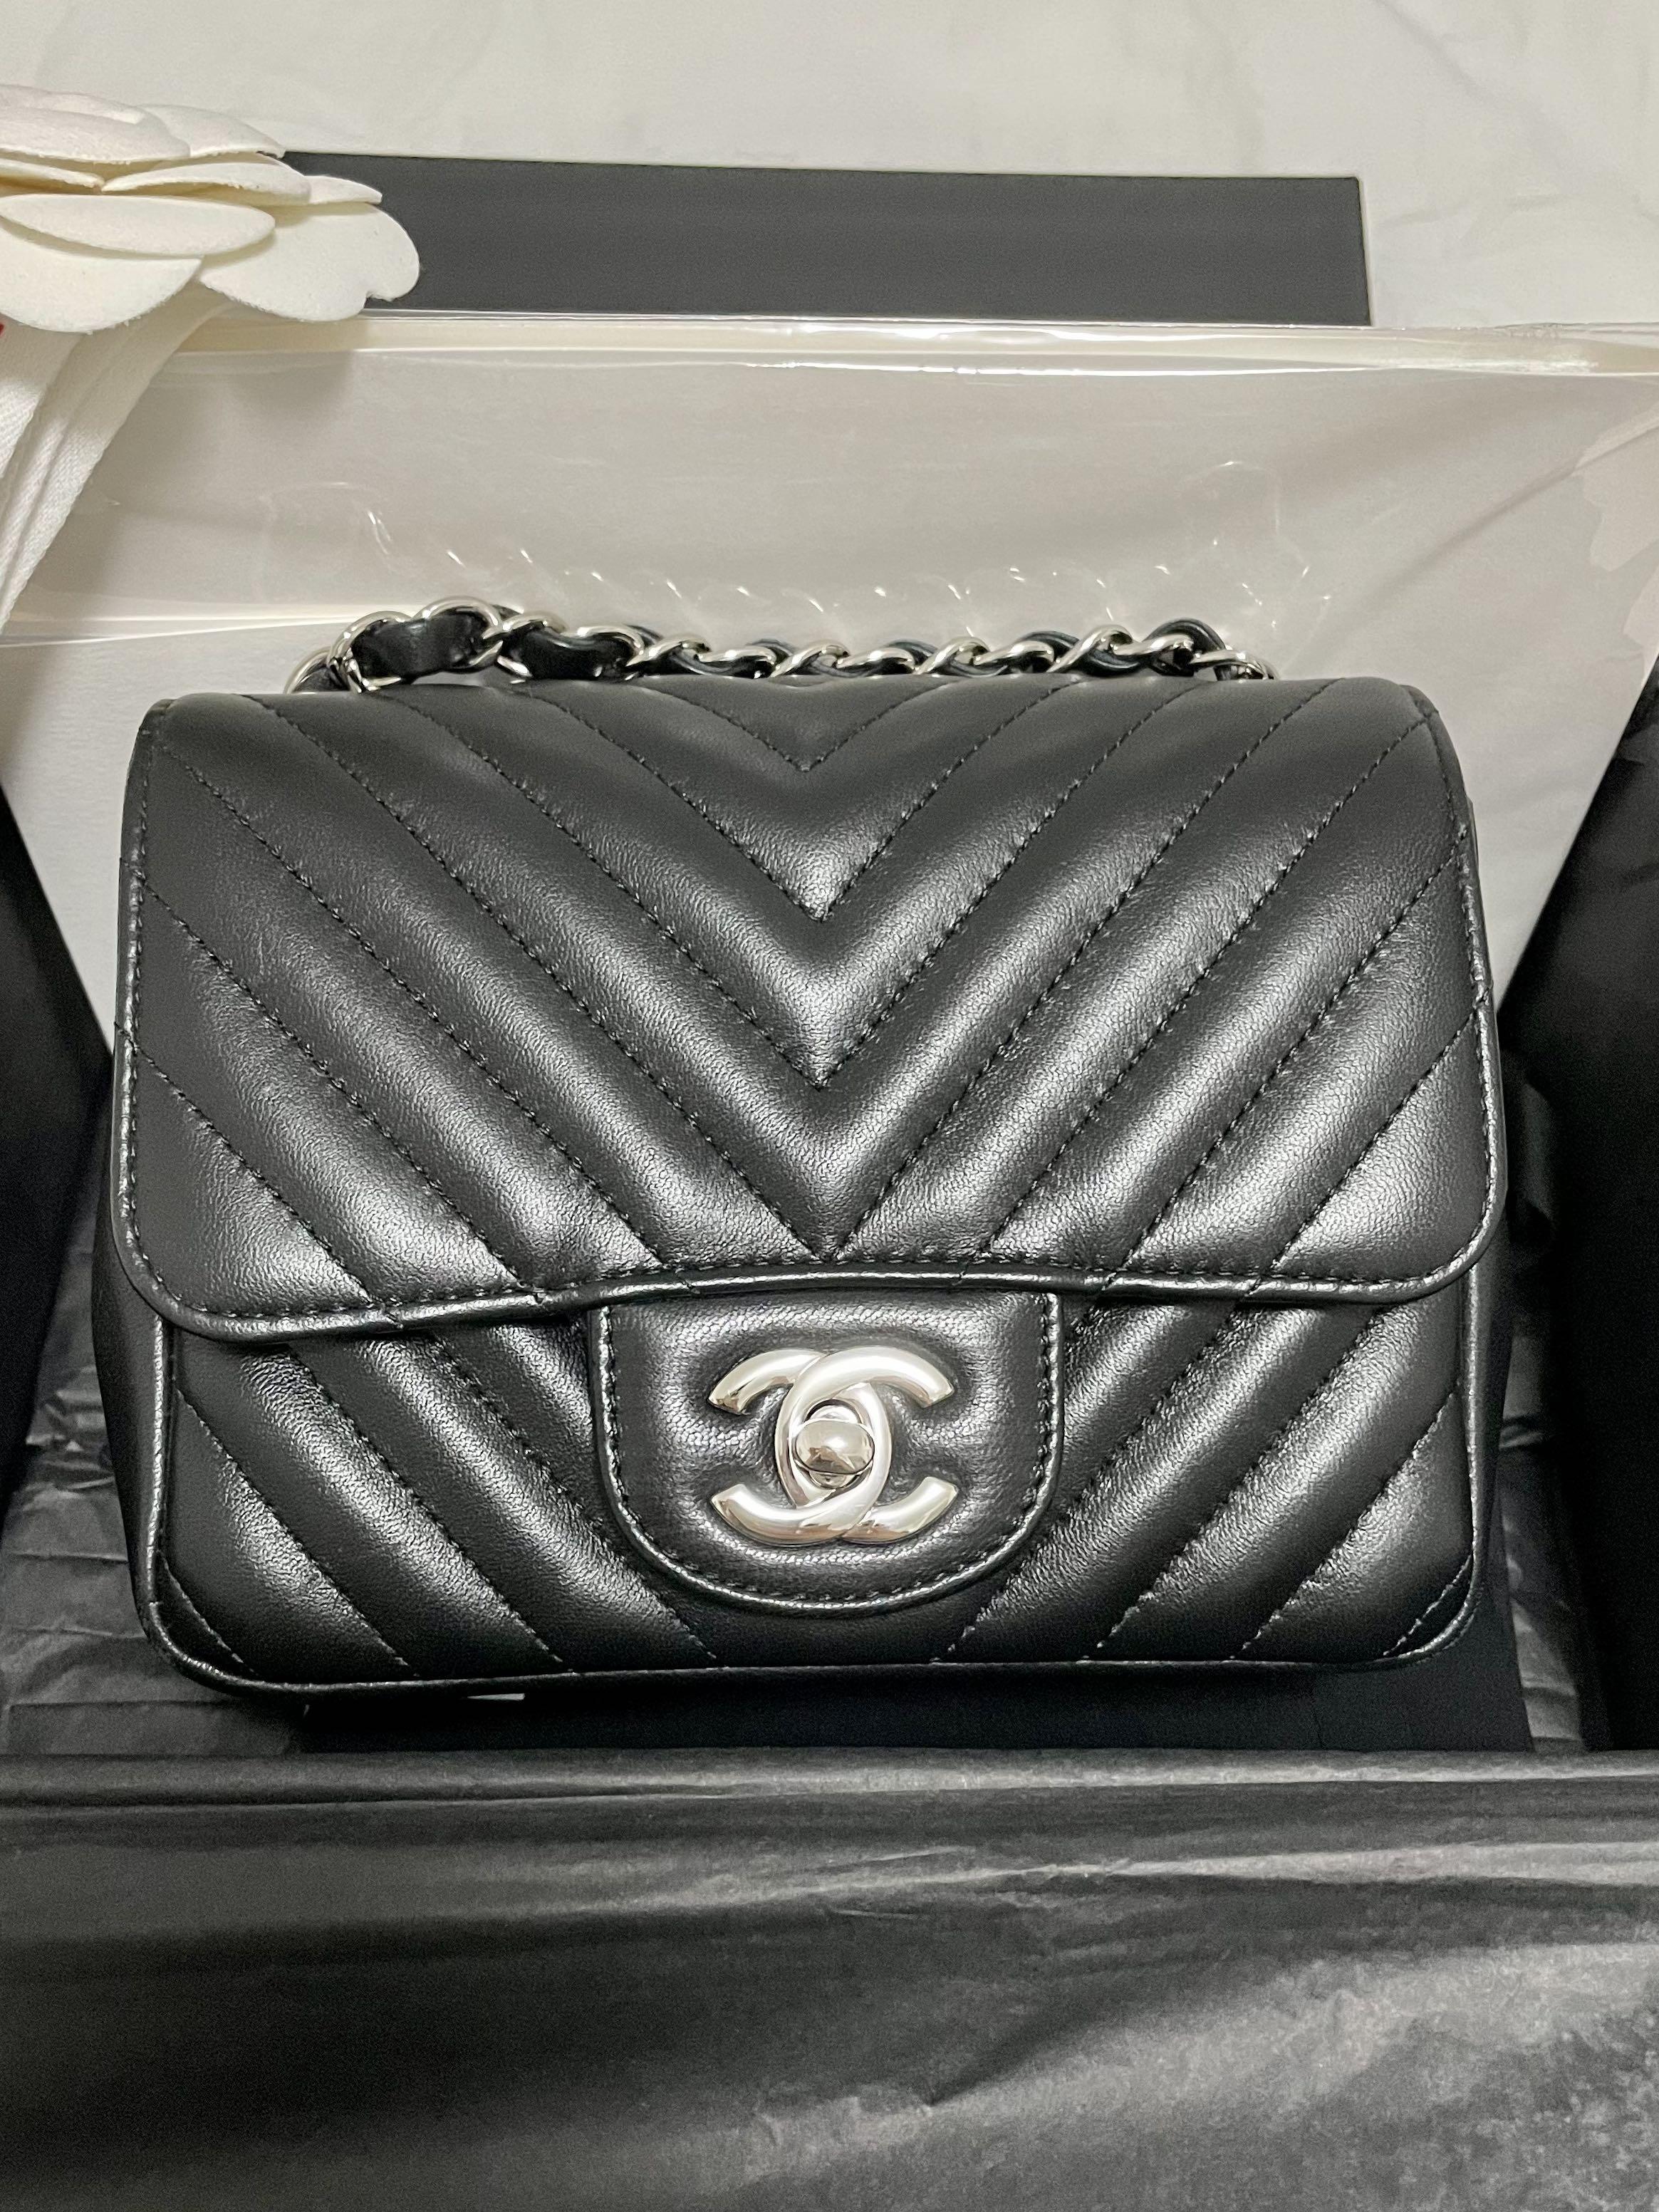 22c CHANEL CRUISE 2021/22, Whats Coming? New bag - Like a Wallet